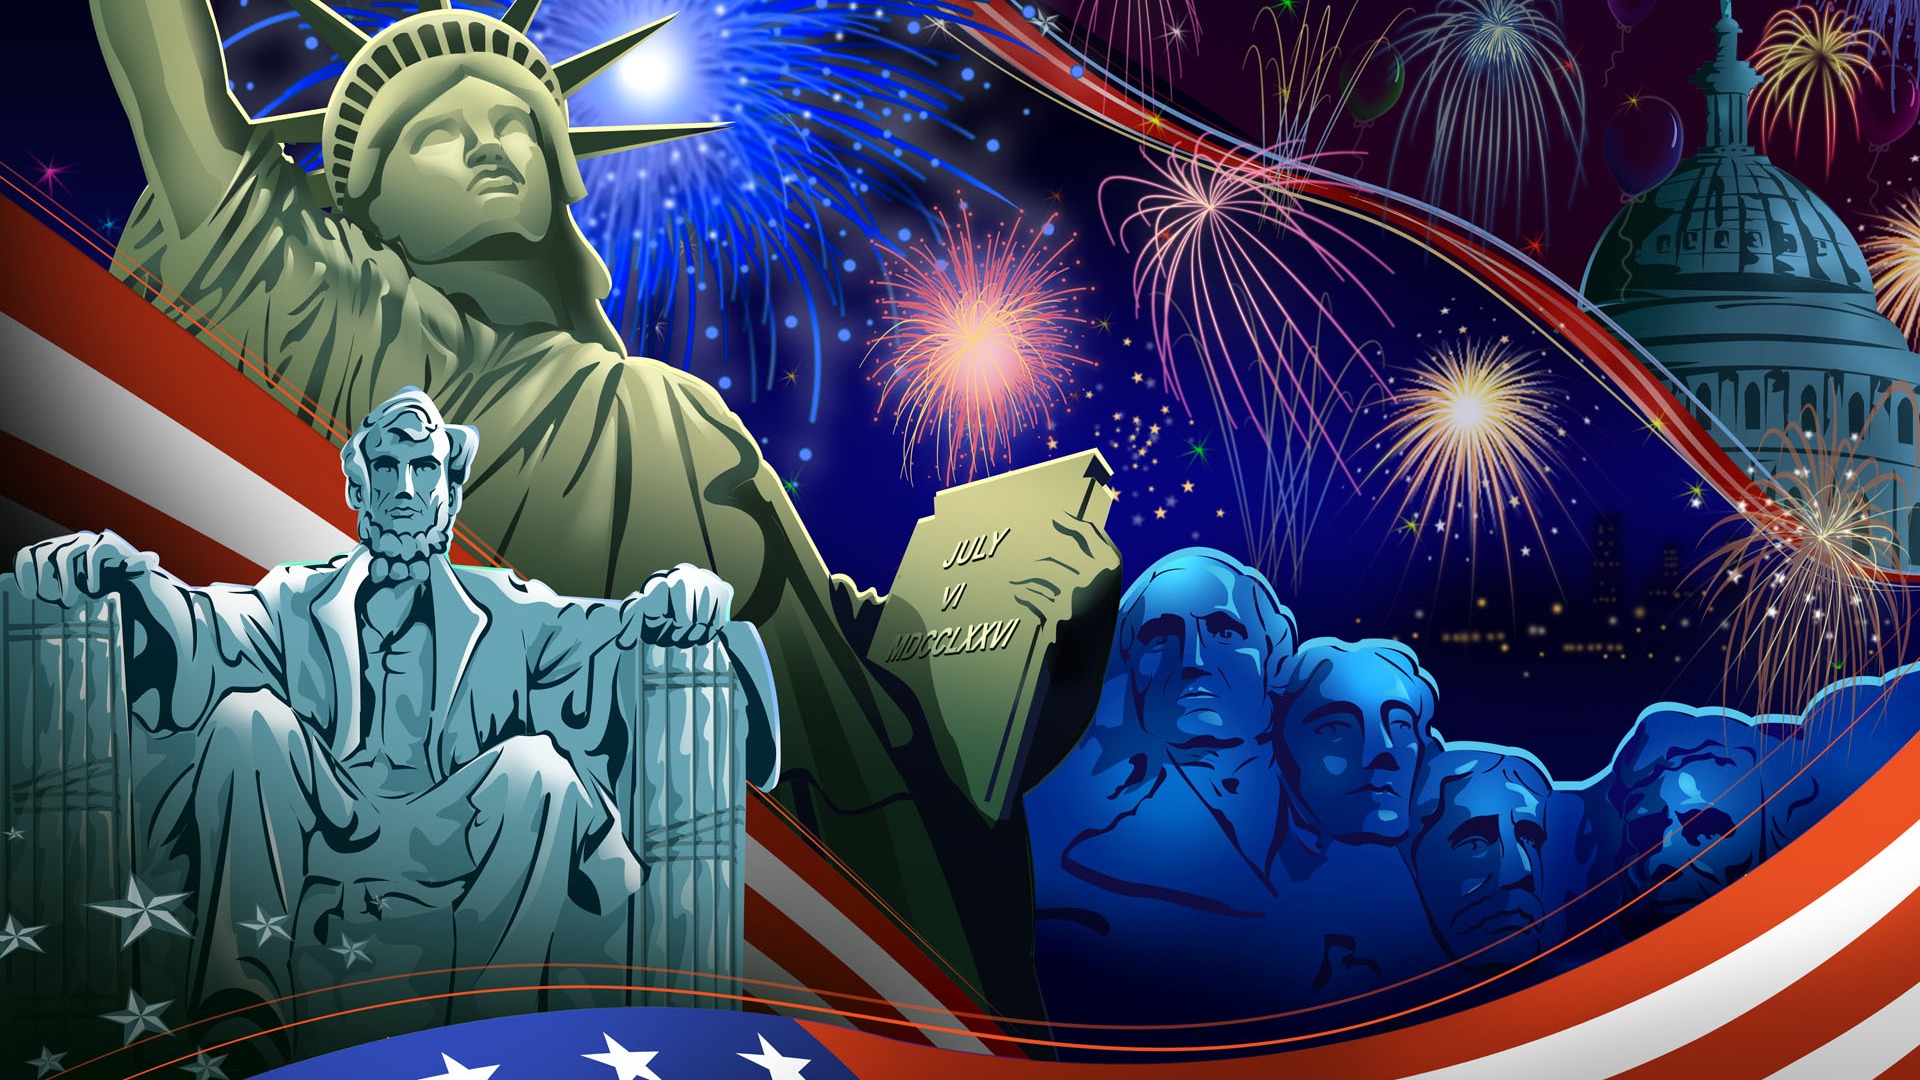 U.S. Independence Day theme wallpaper #19 - 1920x1080